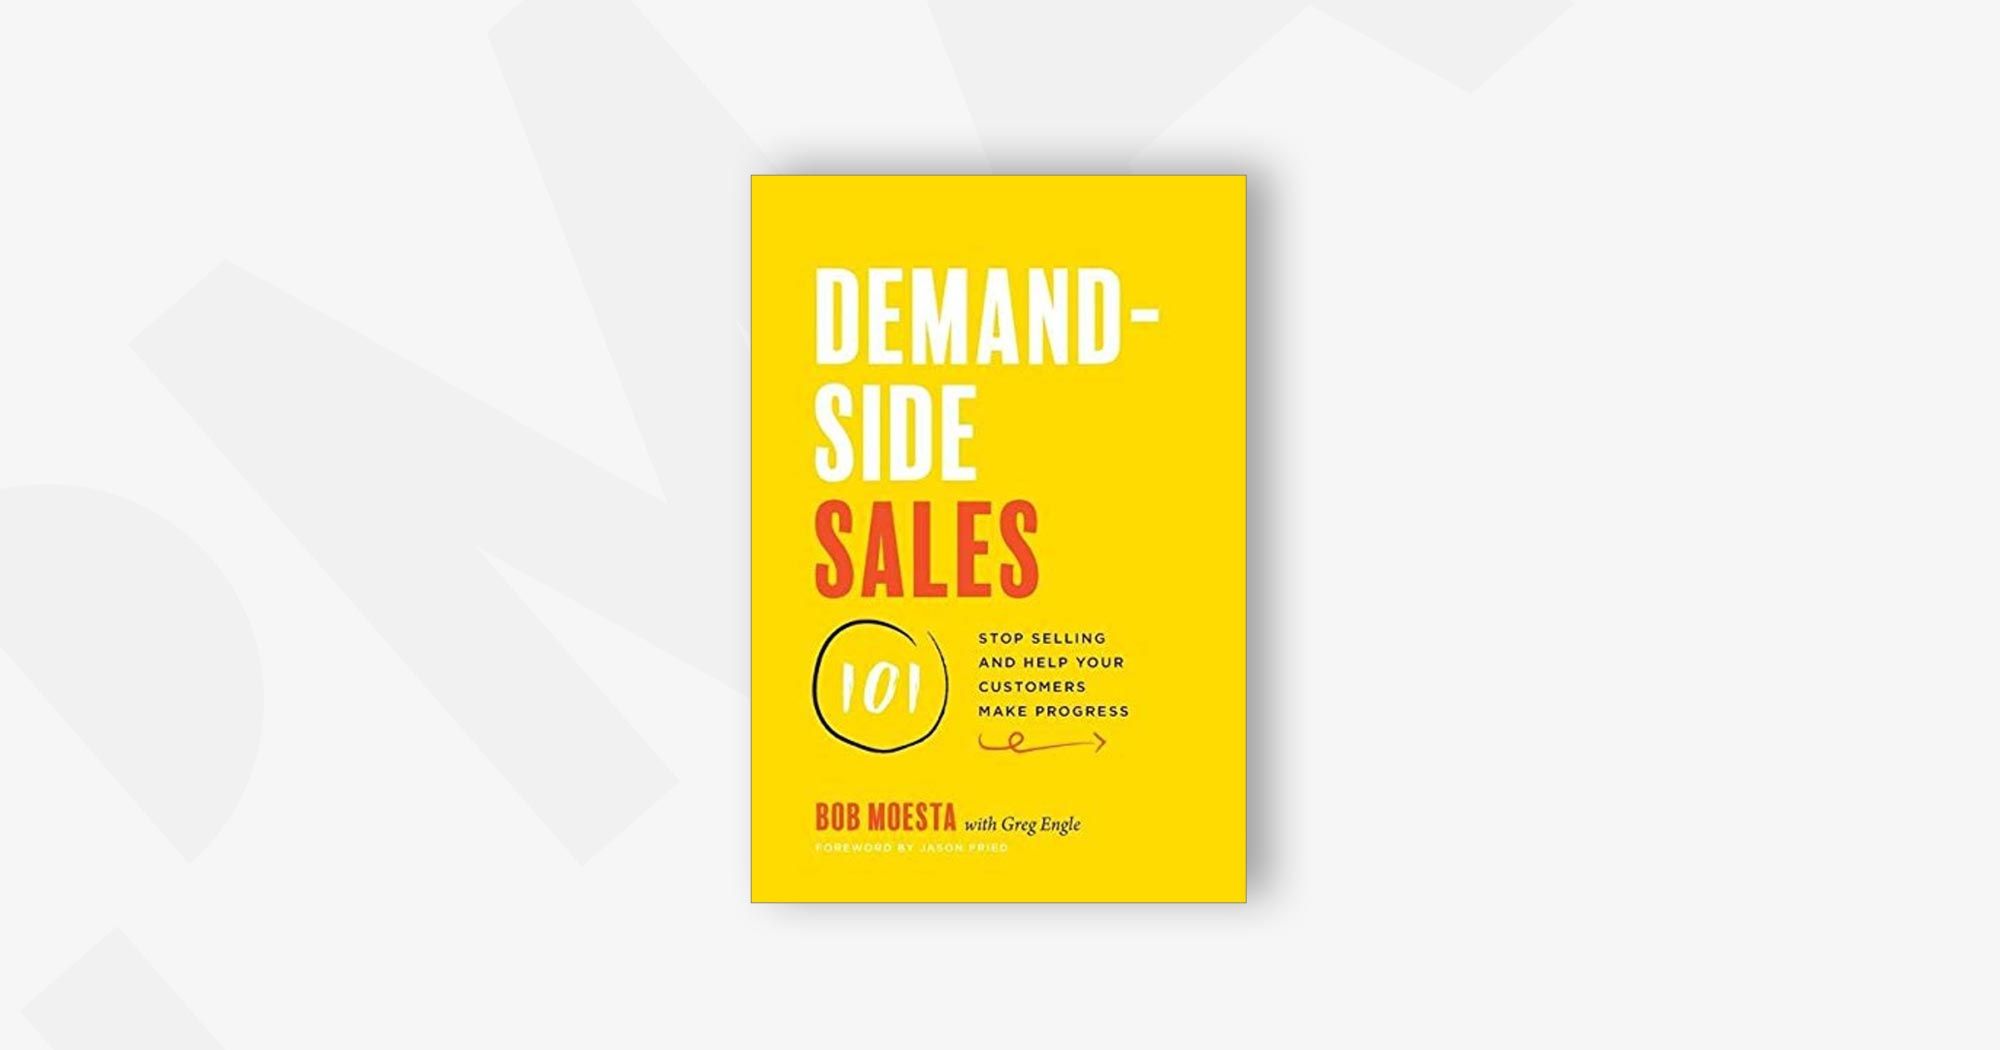 Demand-Side Sales 101: Stop Selling and Help Your Customers Make Progress – Bob Moesta and Greg Engle